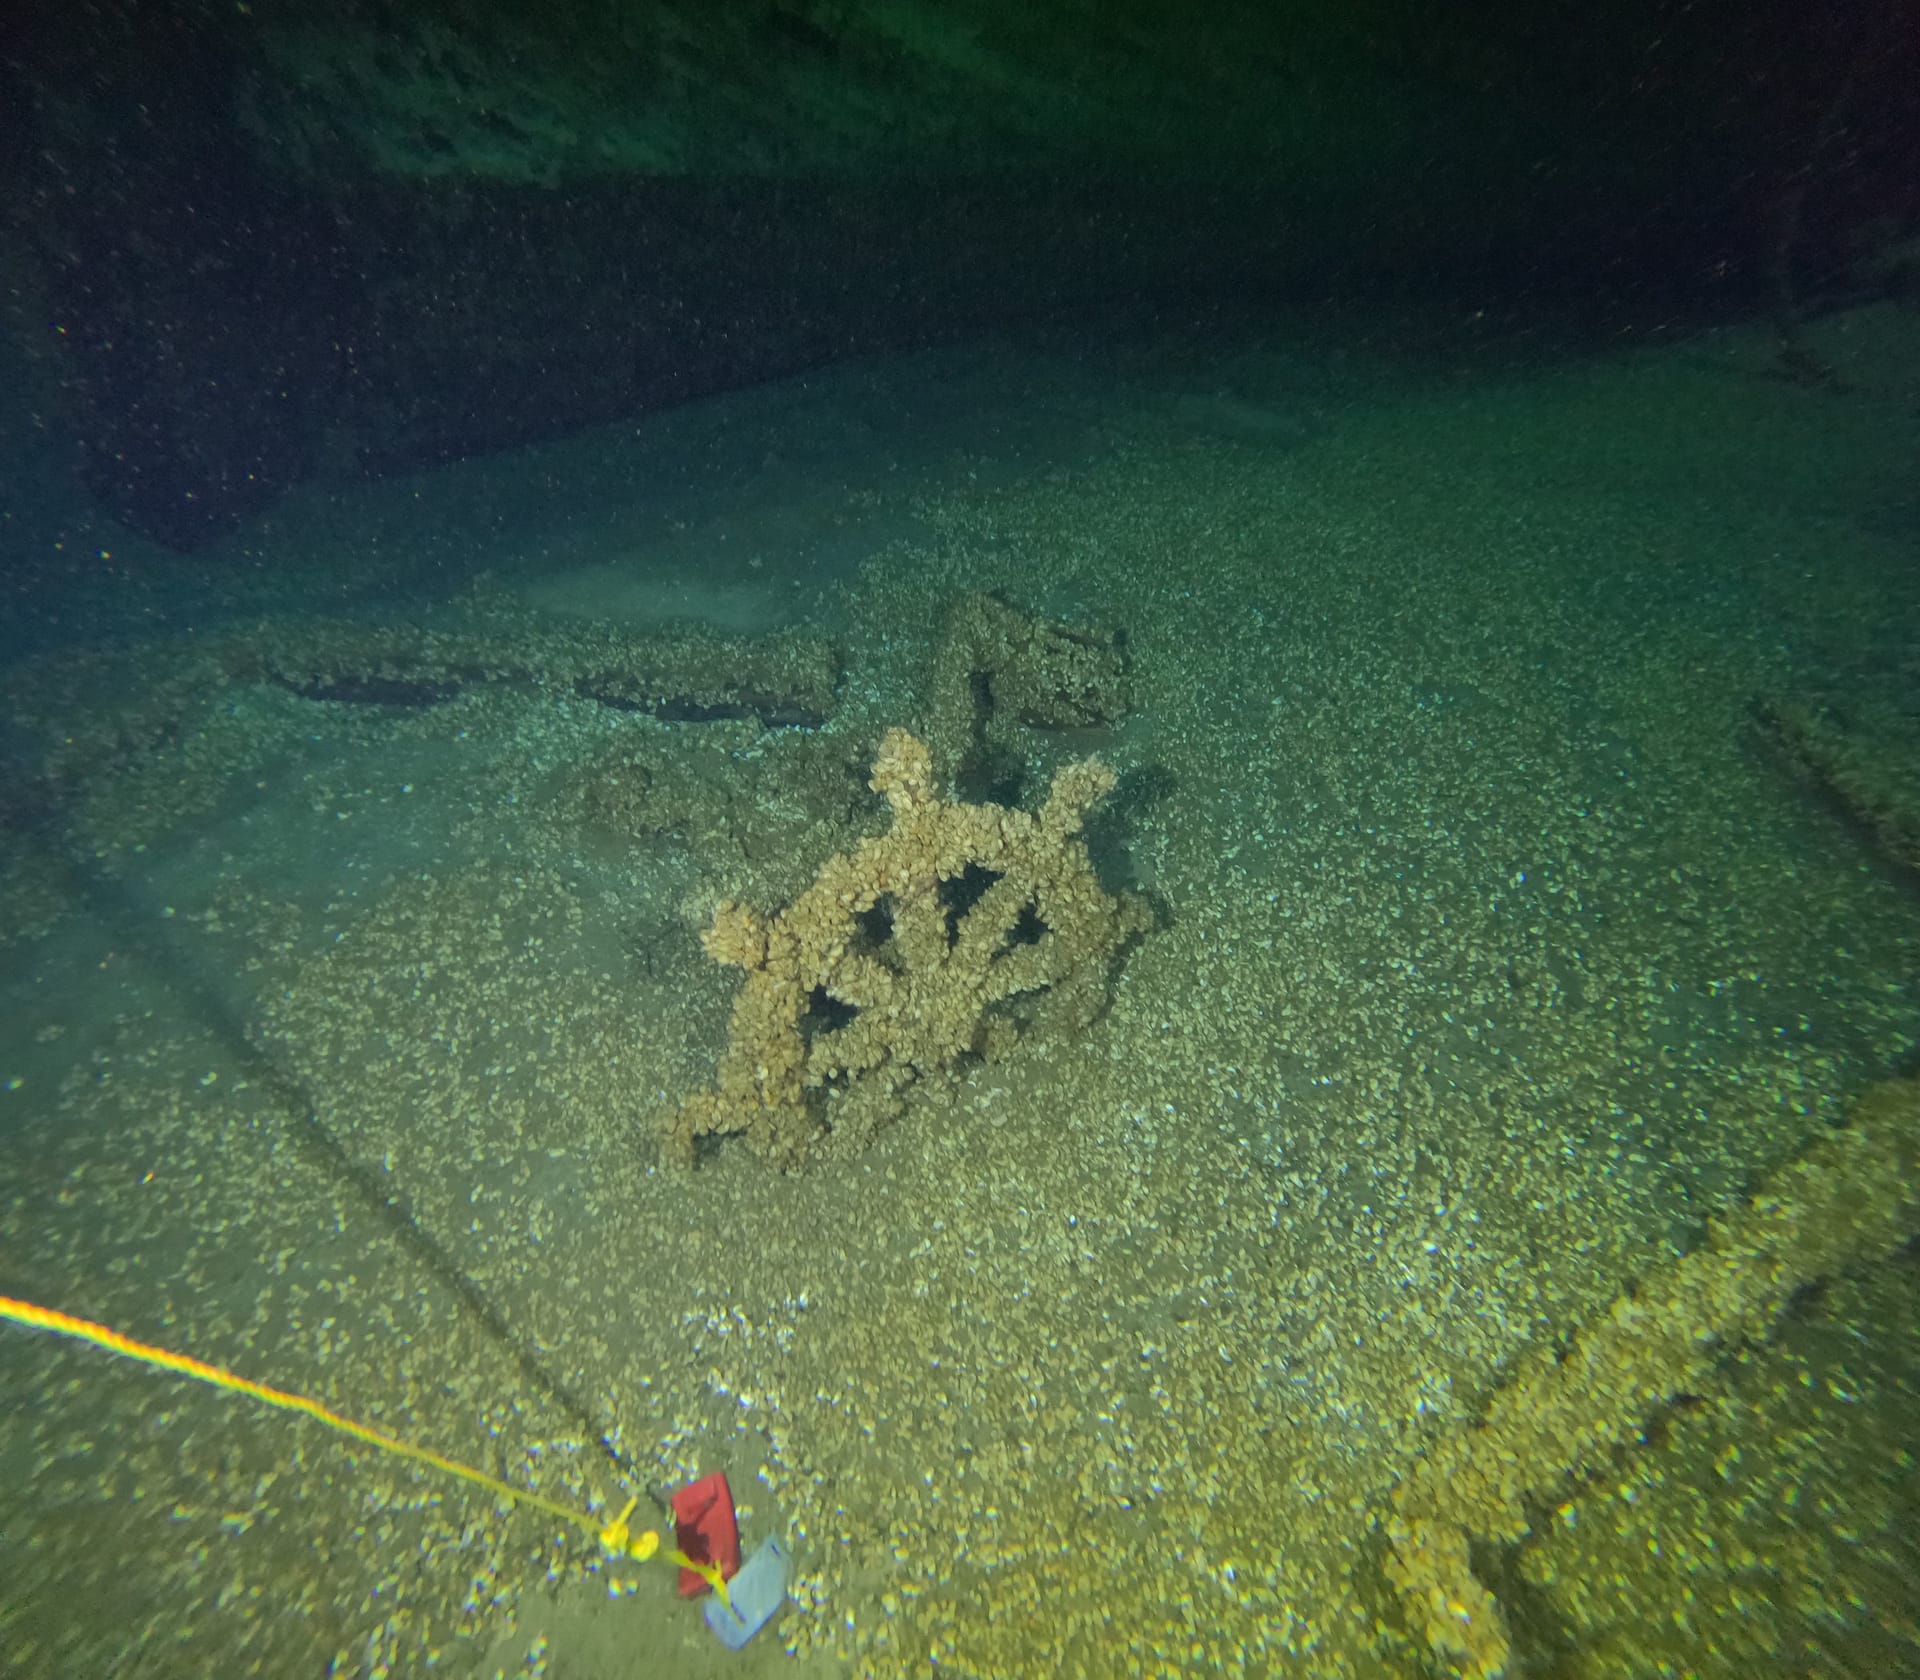 142-Year-Old Shipwreck Discovered in Lake Michigan